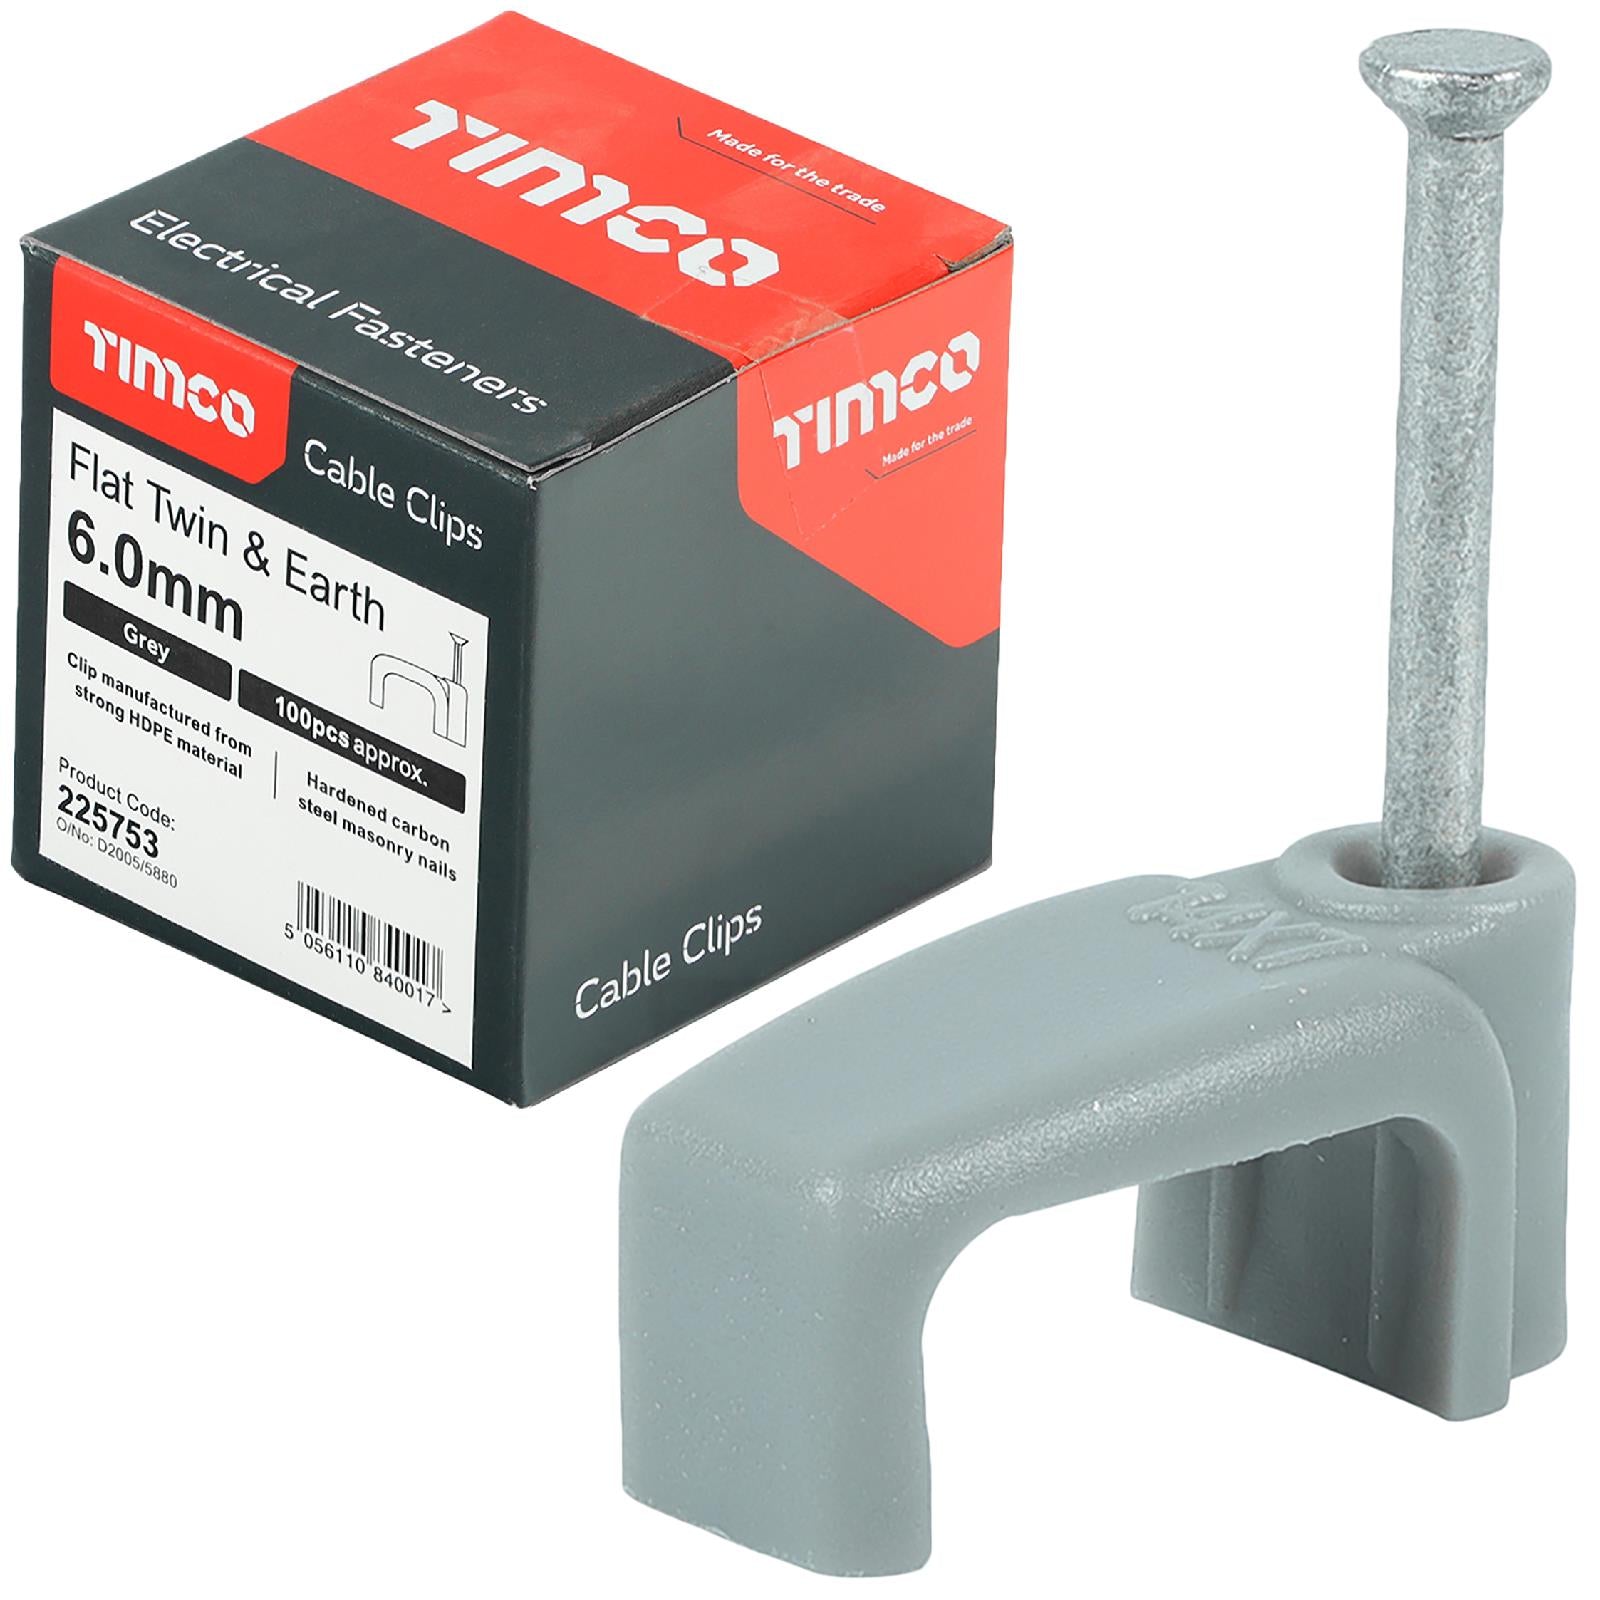 TIMCO Cable Clips Flat Twin and Earth 100 Box 1.5-10mm Choose Size